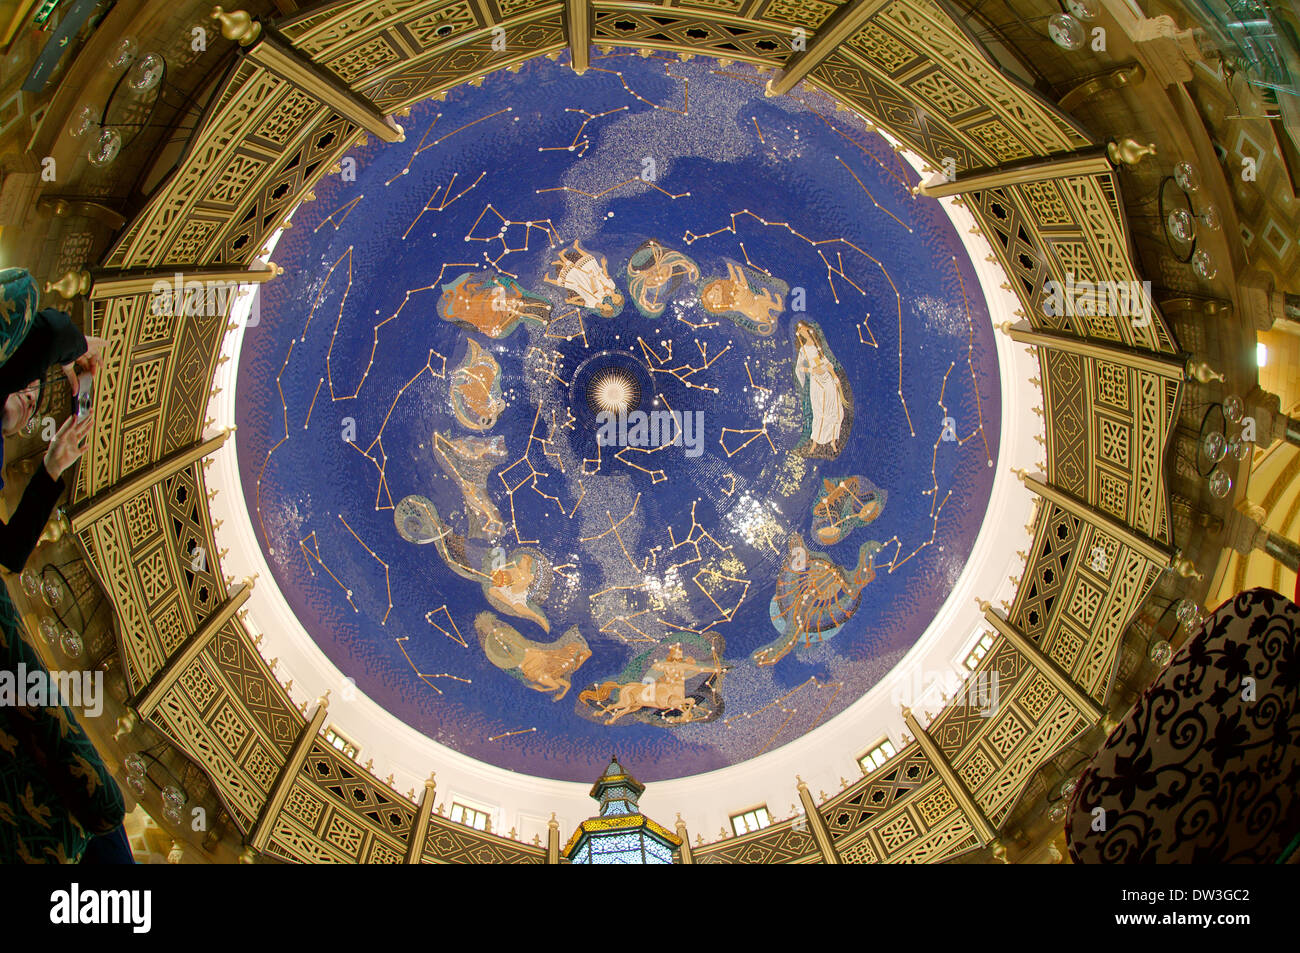 sky map on the ceiling in the museum of Islamic culture, city Sharjah, Sharjah (emirate), UAE Stock Photo